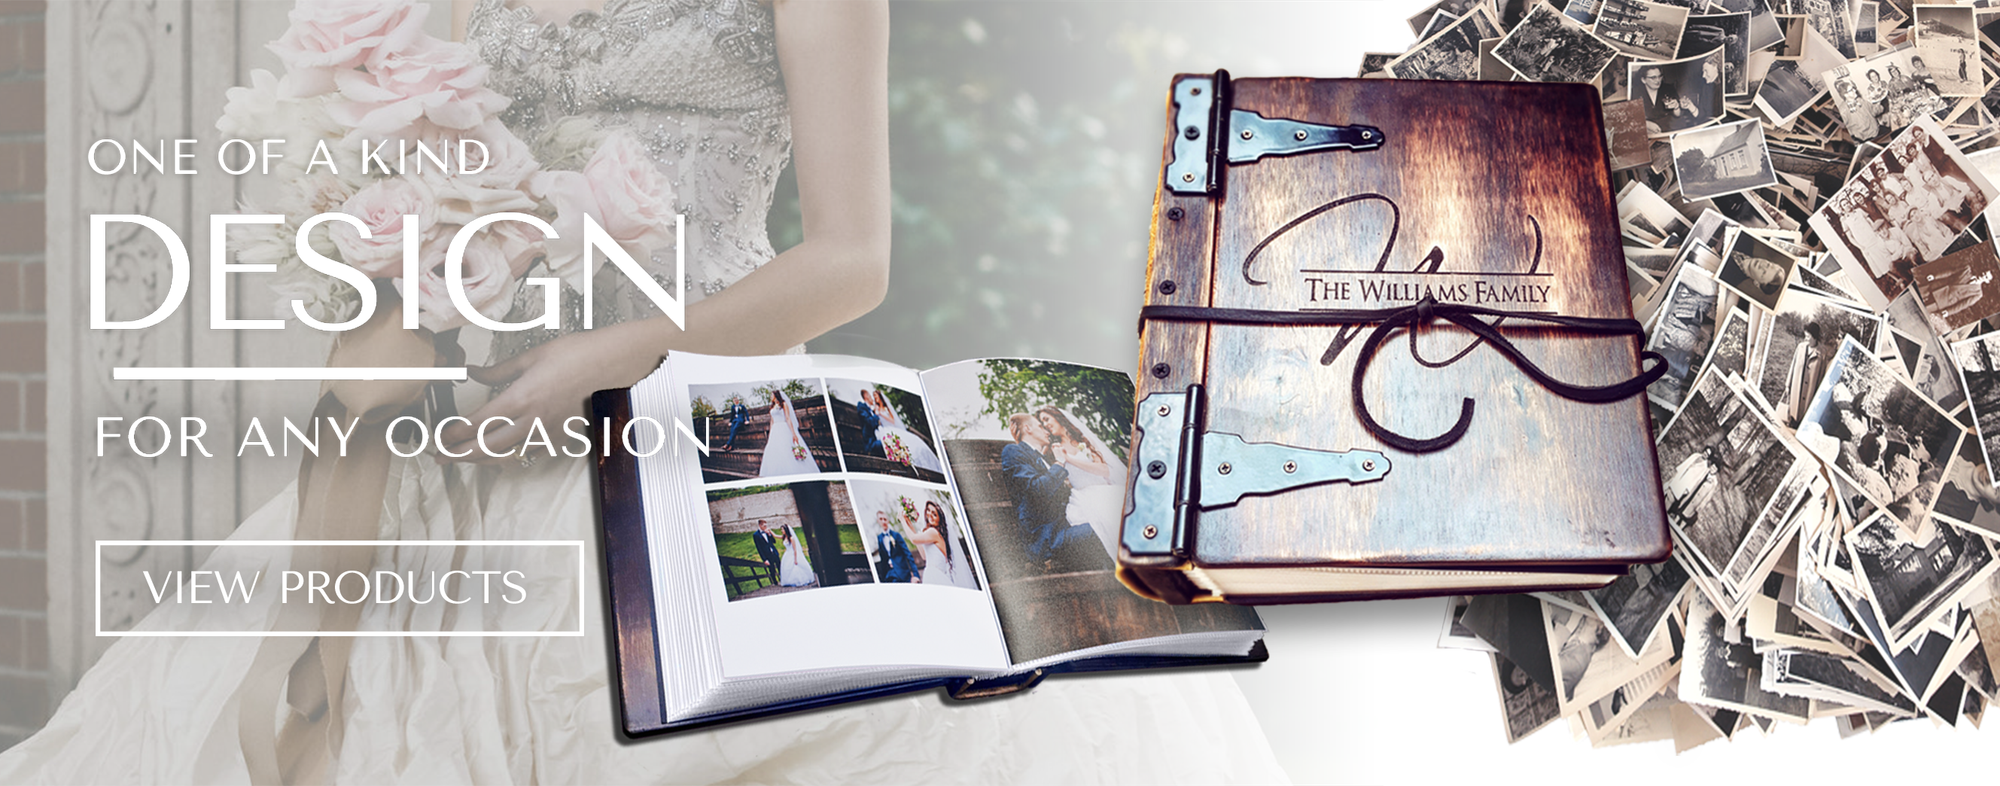 Rustic Engraved Fifth Wedding Anniversary Photo Book | Capture the Moments of Your Love with this Beautiful Photo Book - The Best Gift for Your Fifth Wedding Anniversary